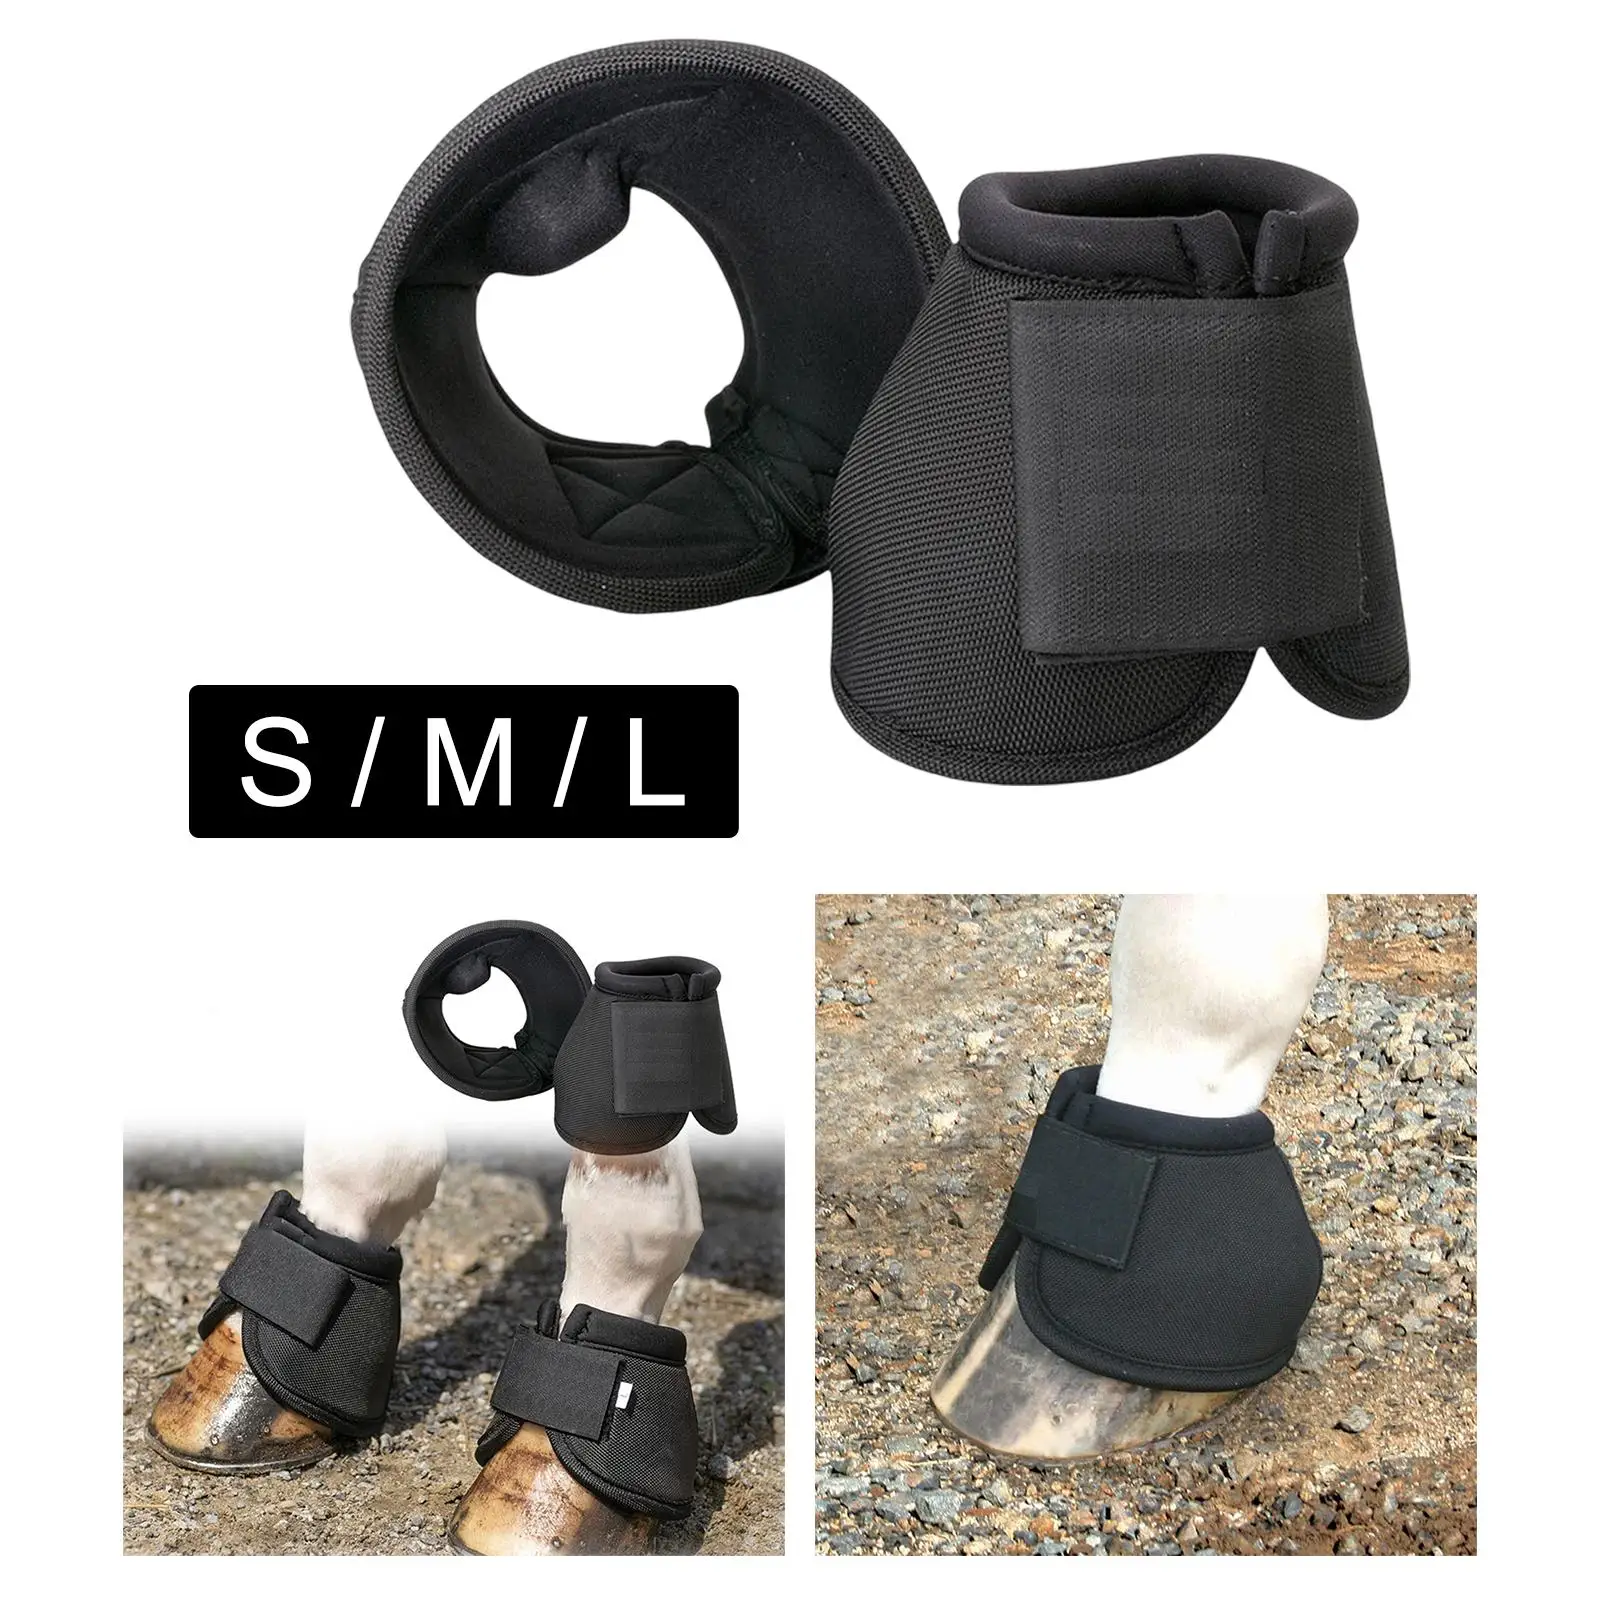 Durable Horse Bell Boot Rubber Horse Hoof Guard Bowl Quick Drying No Turn Maximum Protection and Comfort for Protector Pair